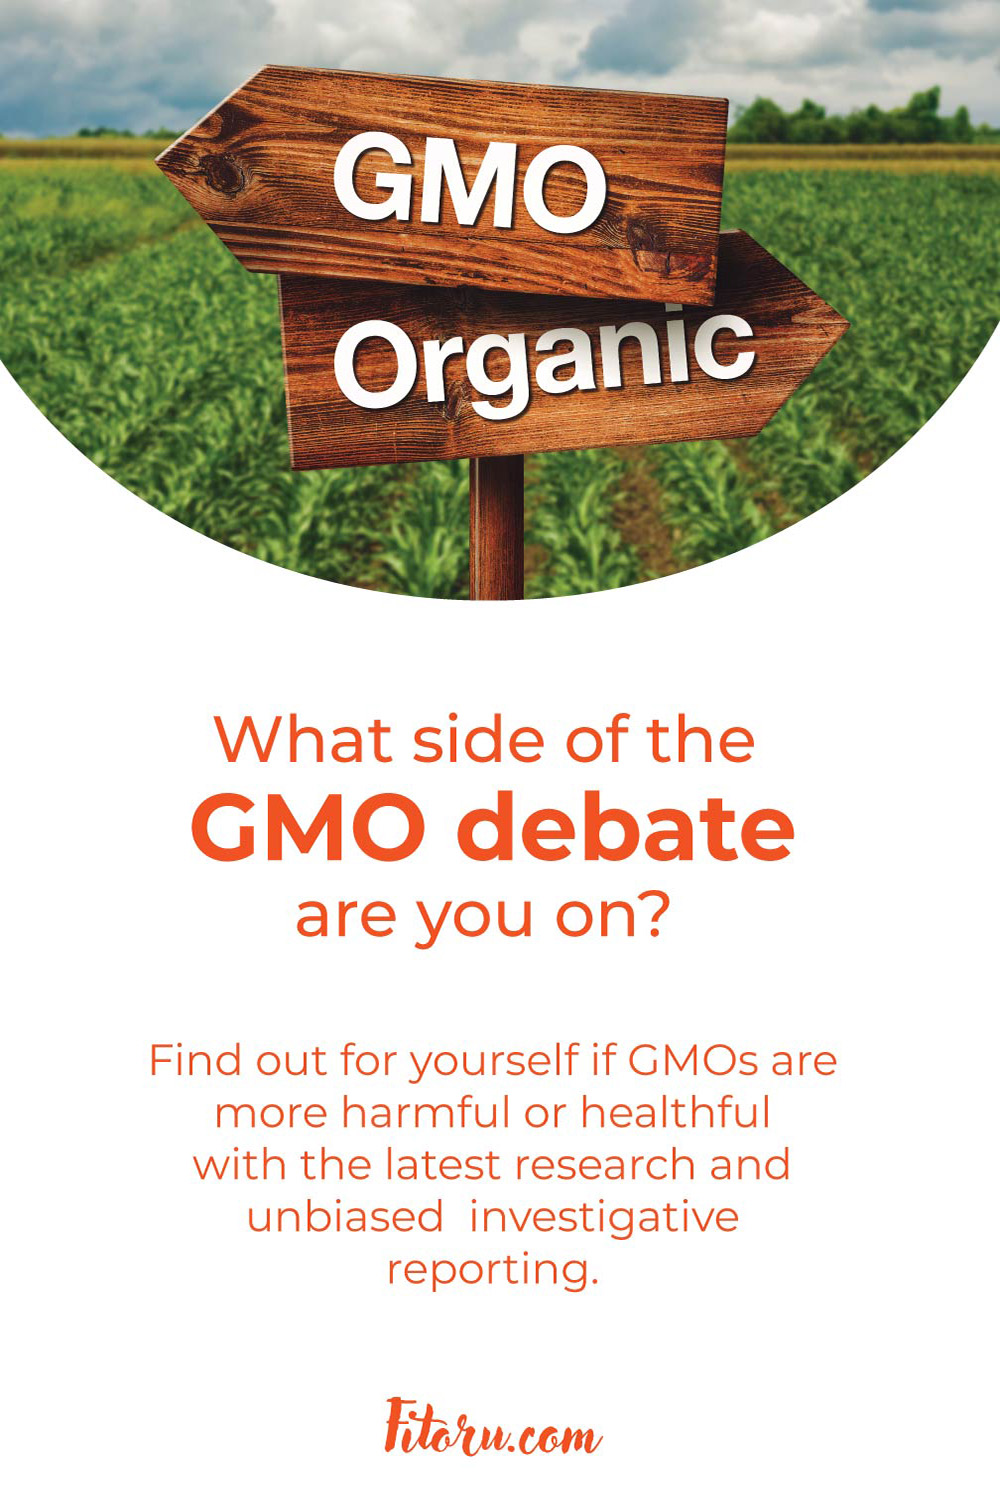 What side of the GMO debate are you on?